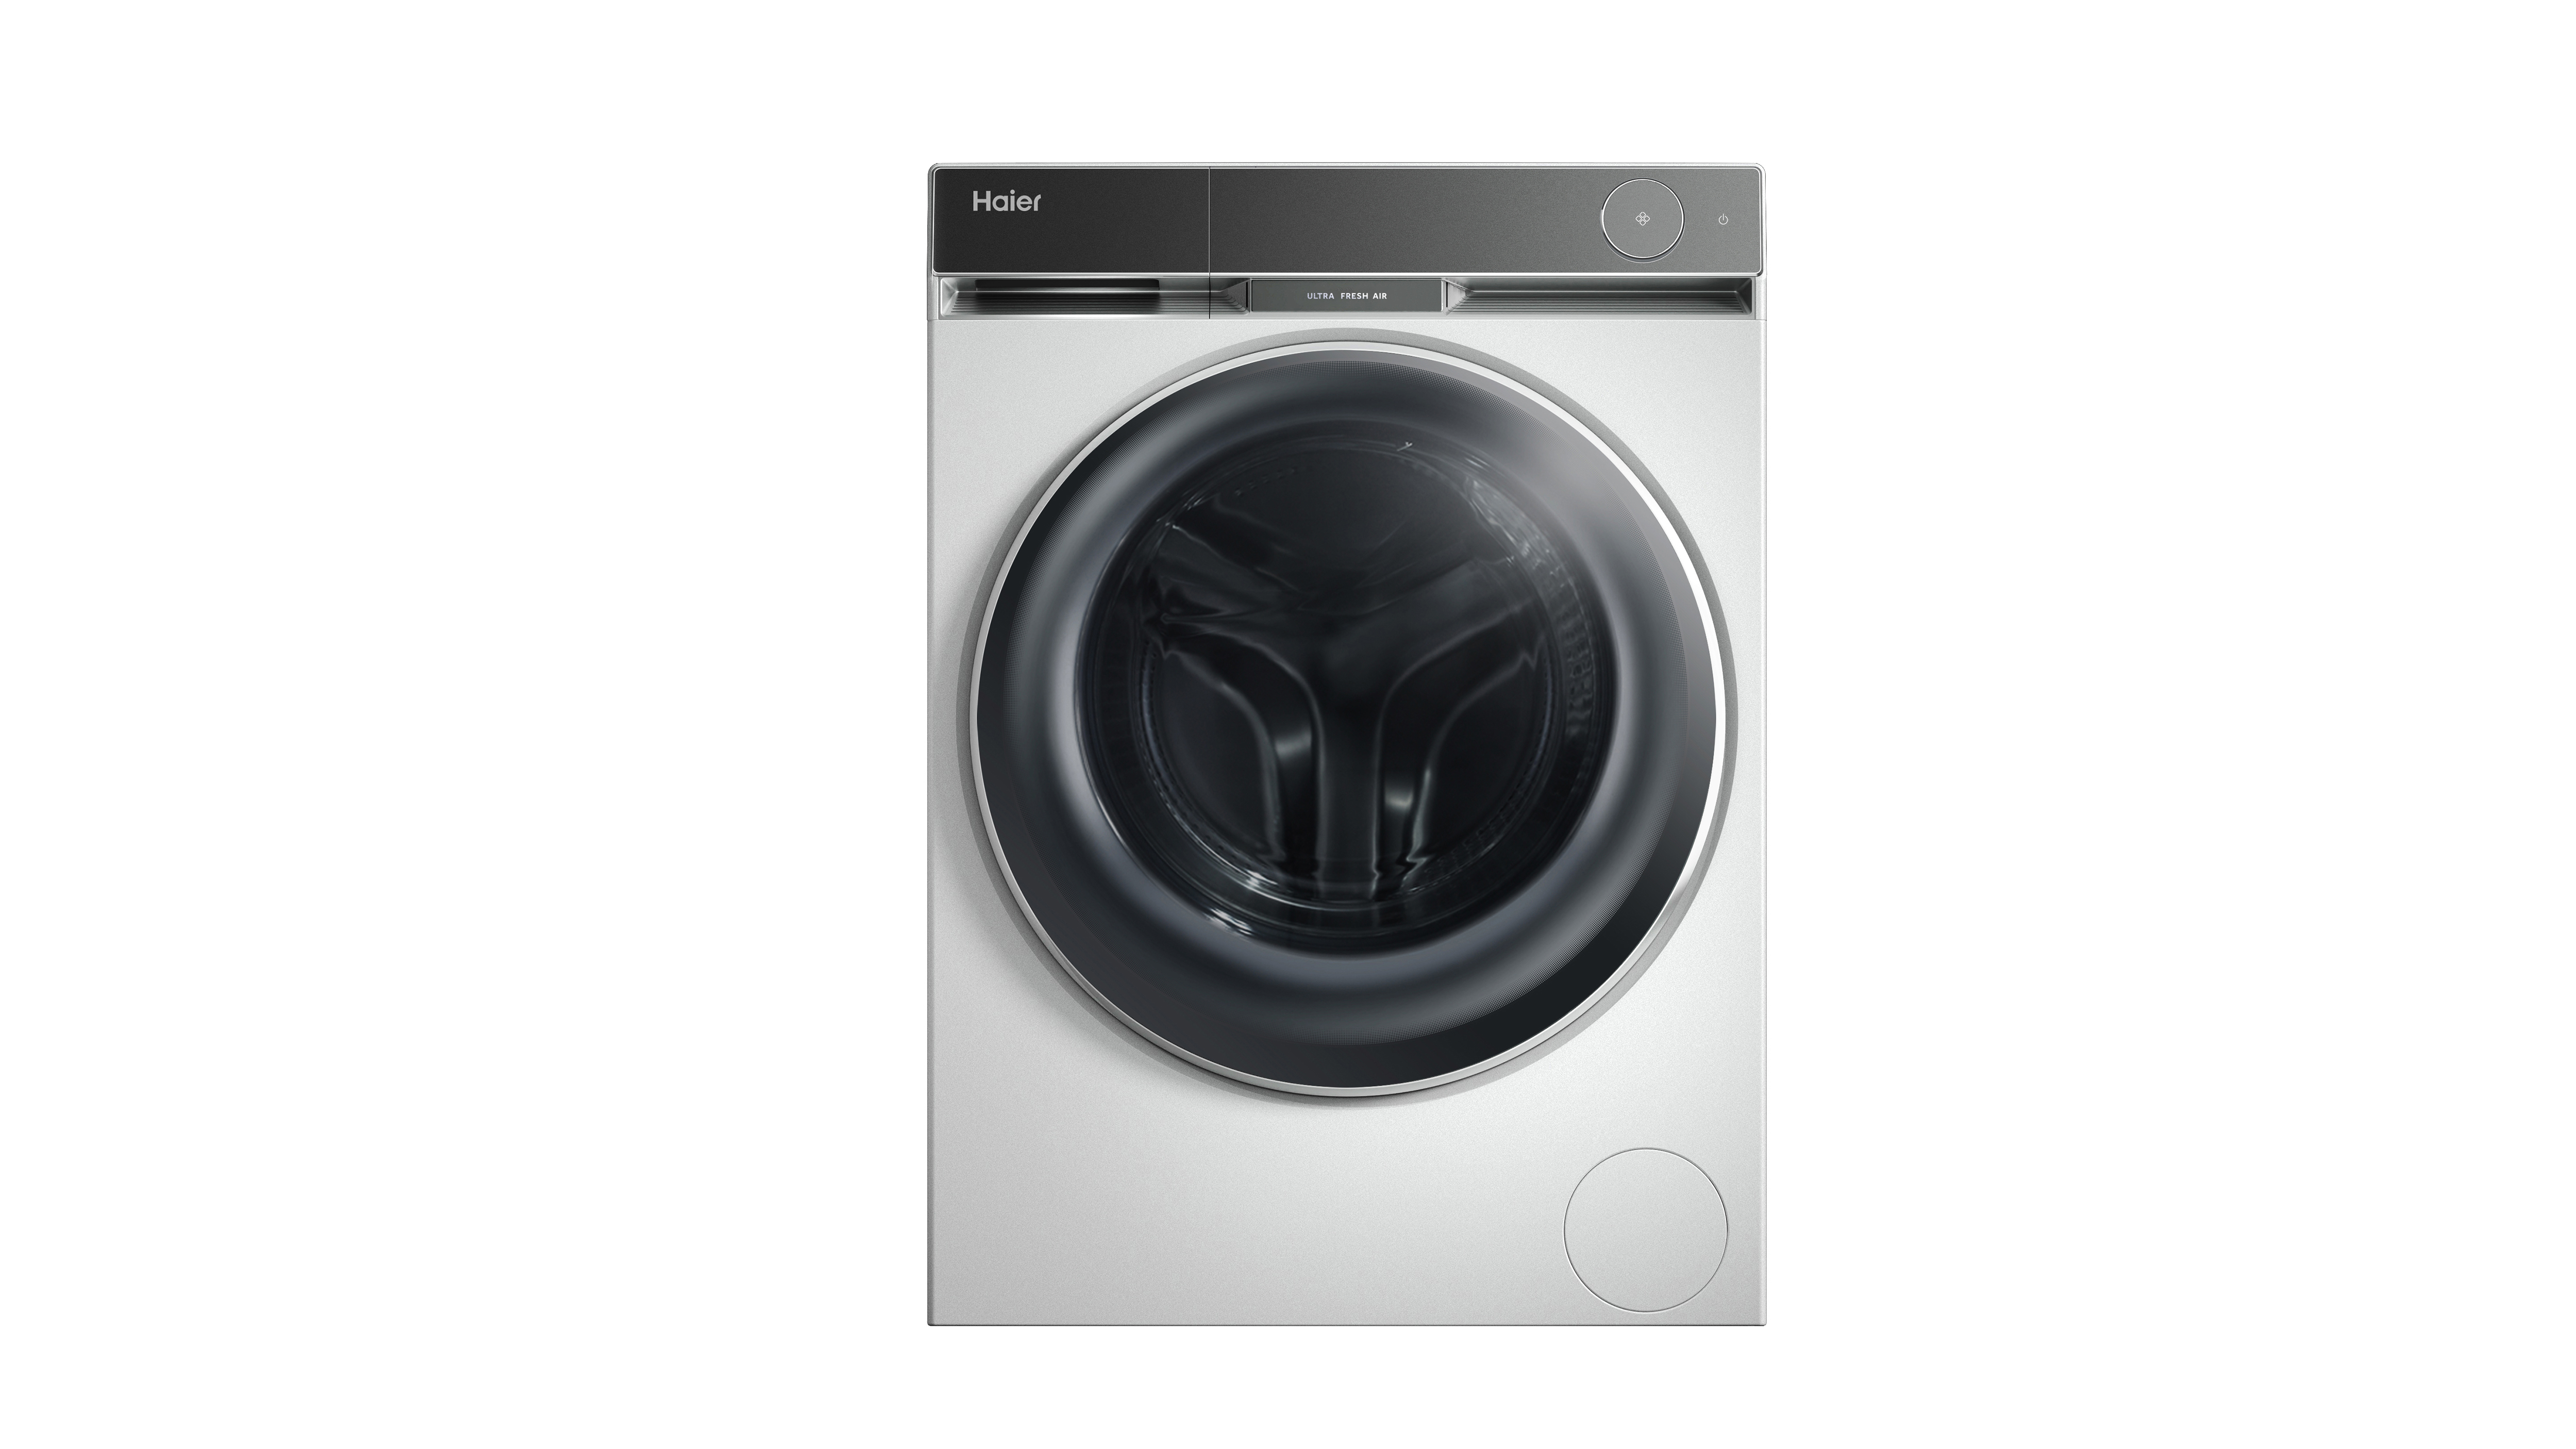 iF Design - Haier X Series11 Washer and Dryer Set